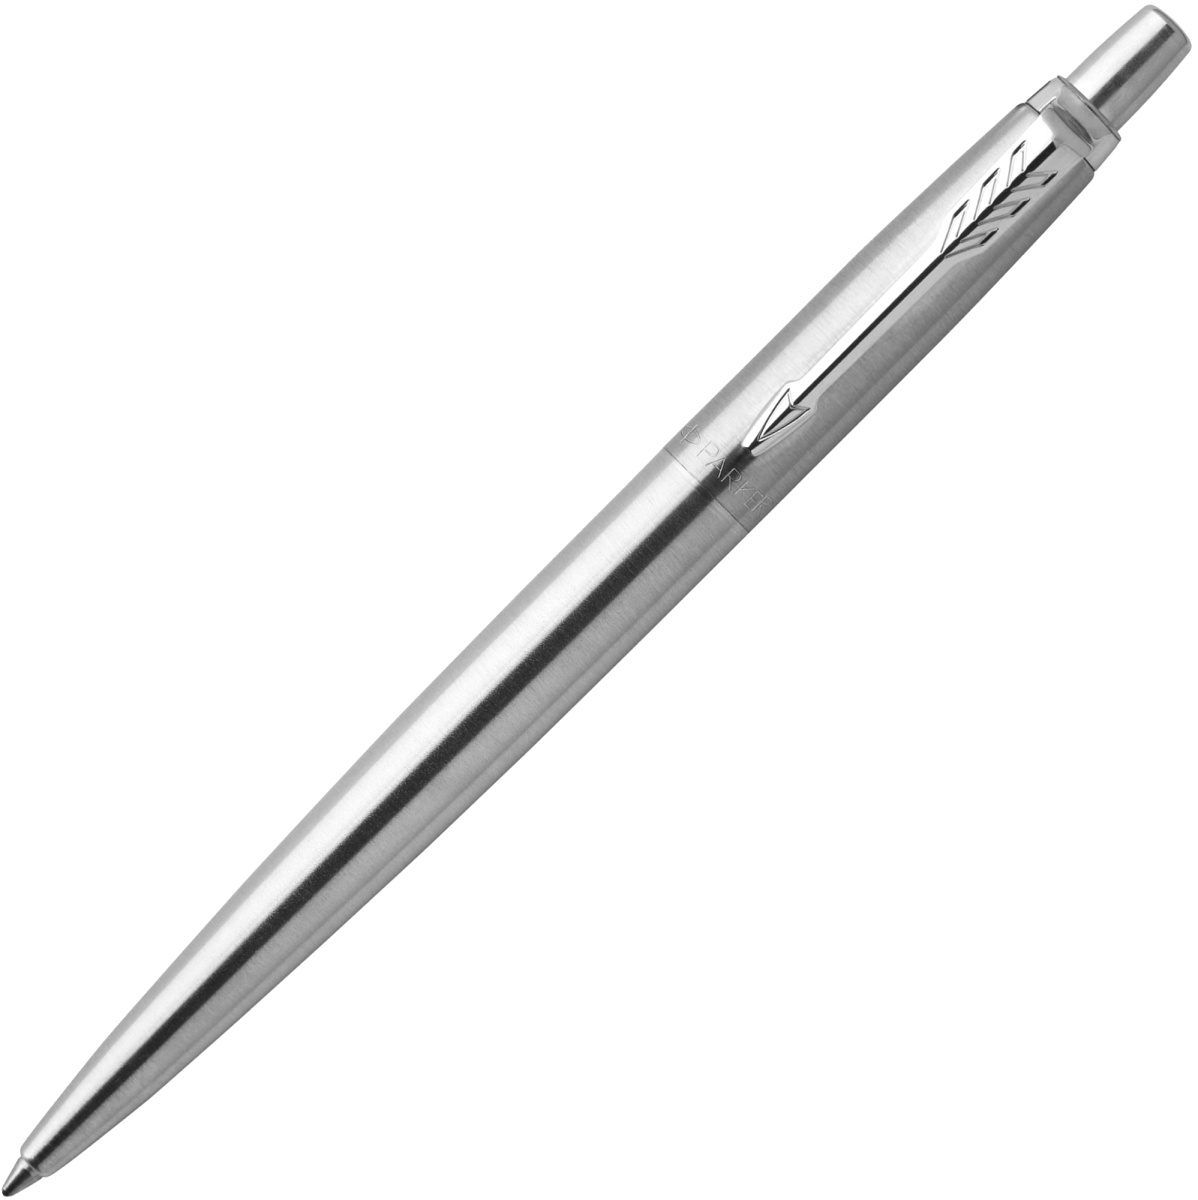  Шариковая ручка Parker Jotter Core K61, Stainless Steel CT